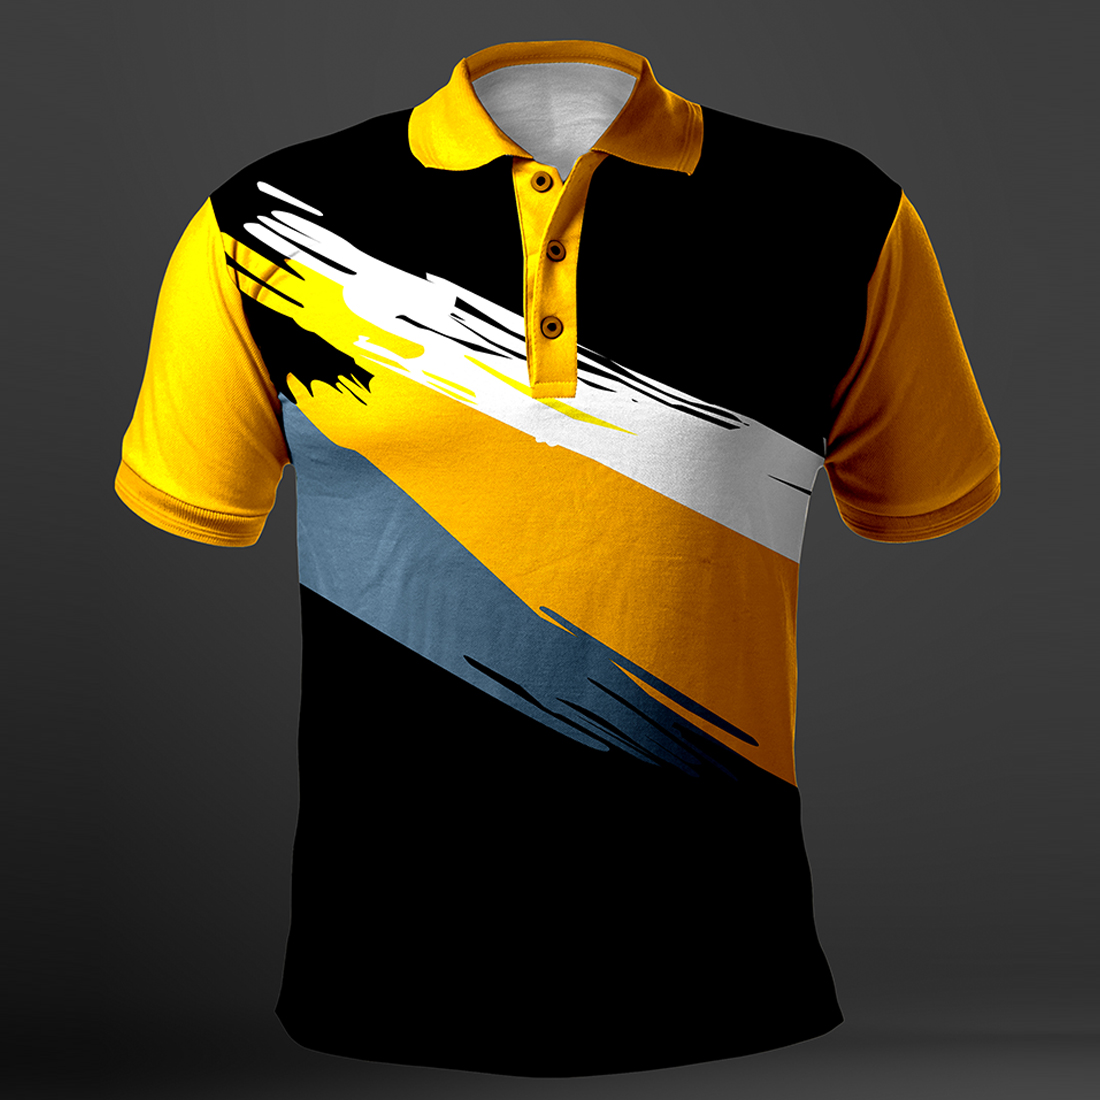 Jersey design, Jersey texture, Sports wear cover image.